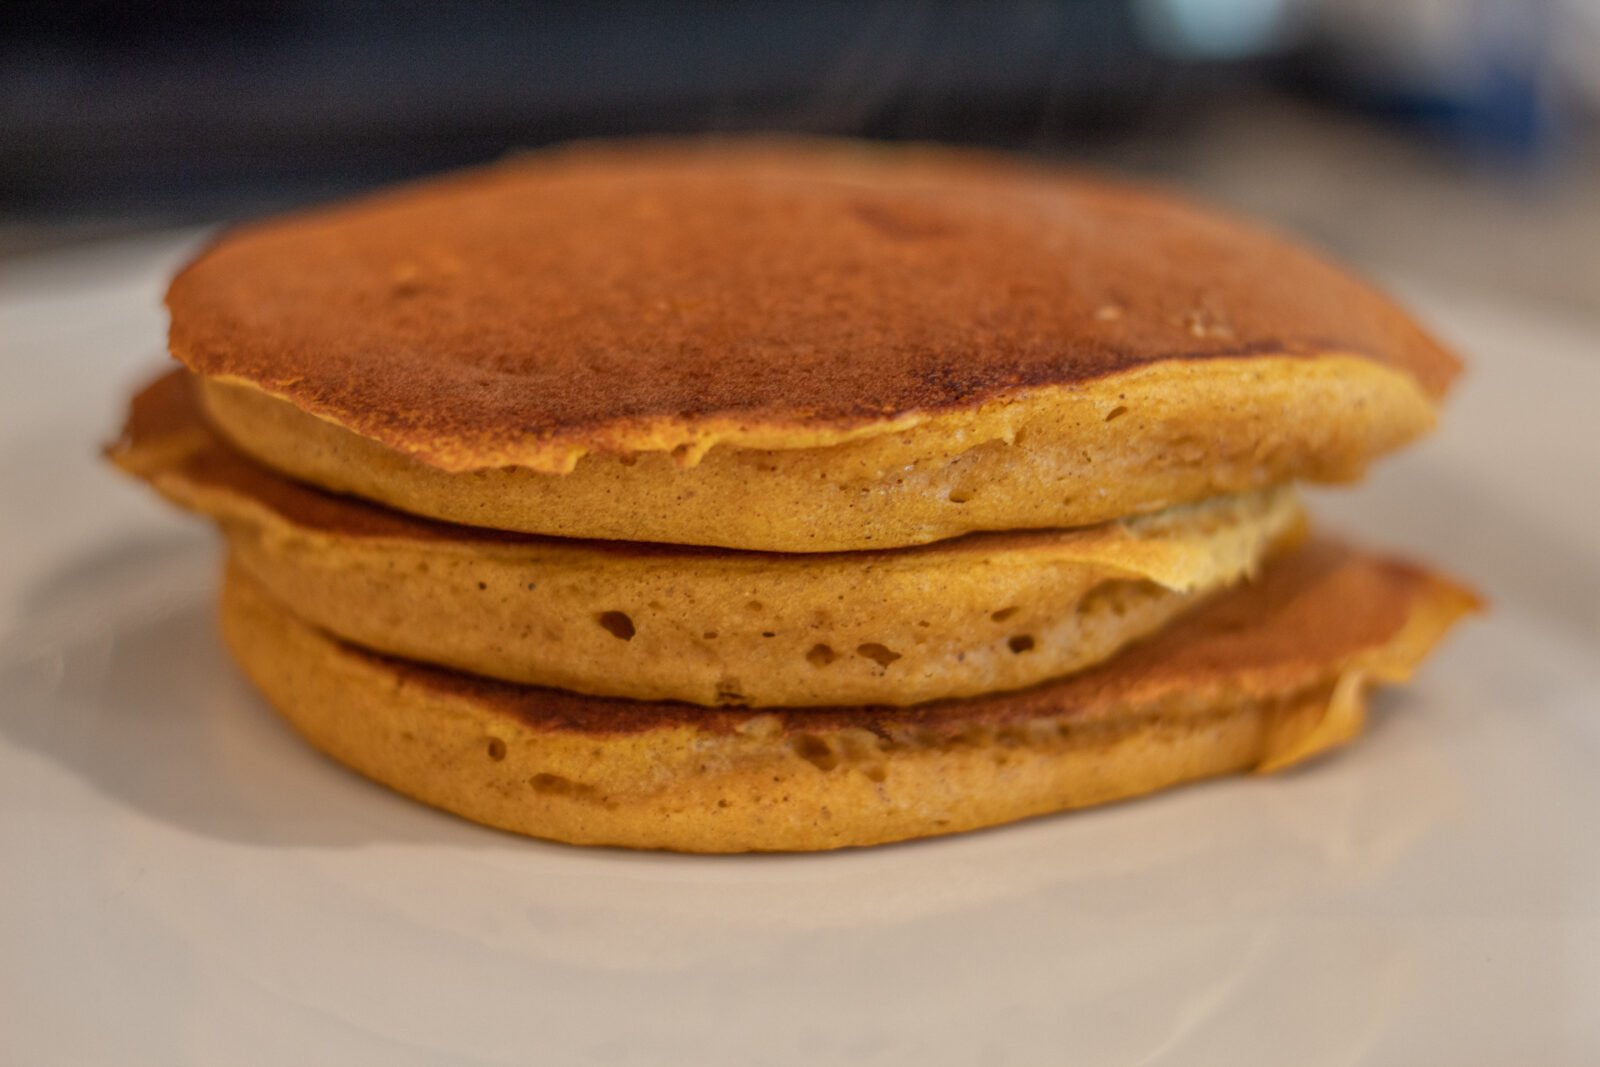 Pancakes without syrup